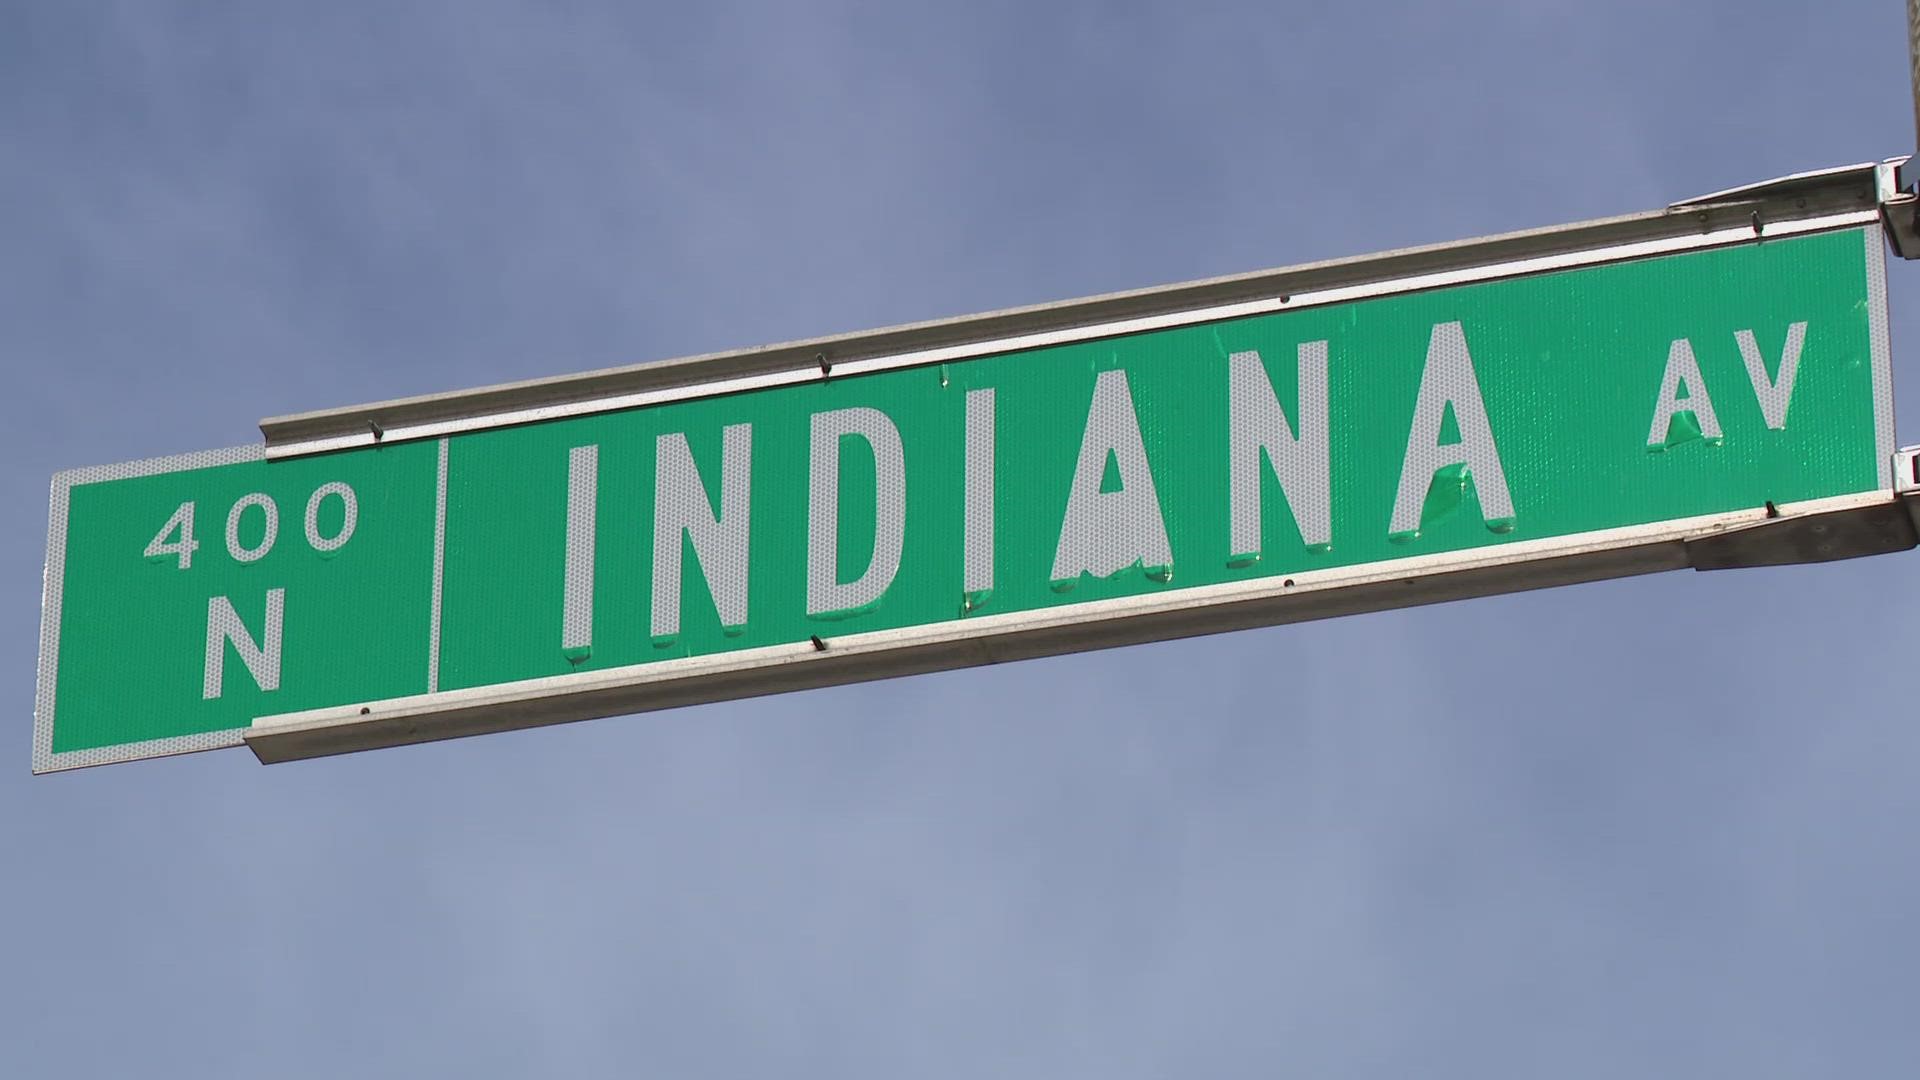 Indiana Avenue served as a pathway for local Black musicians for several decades.